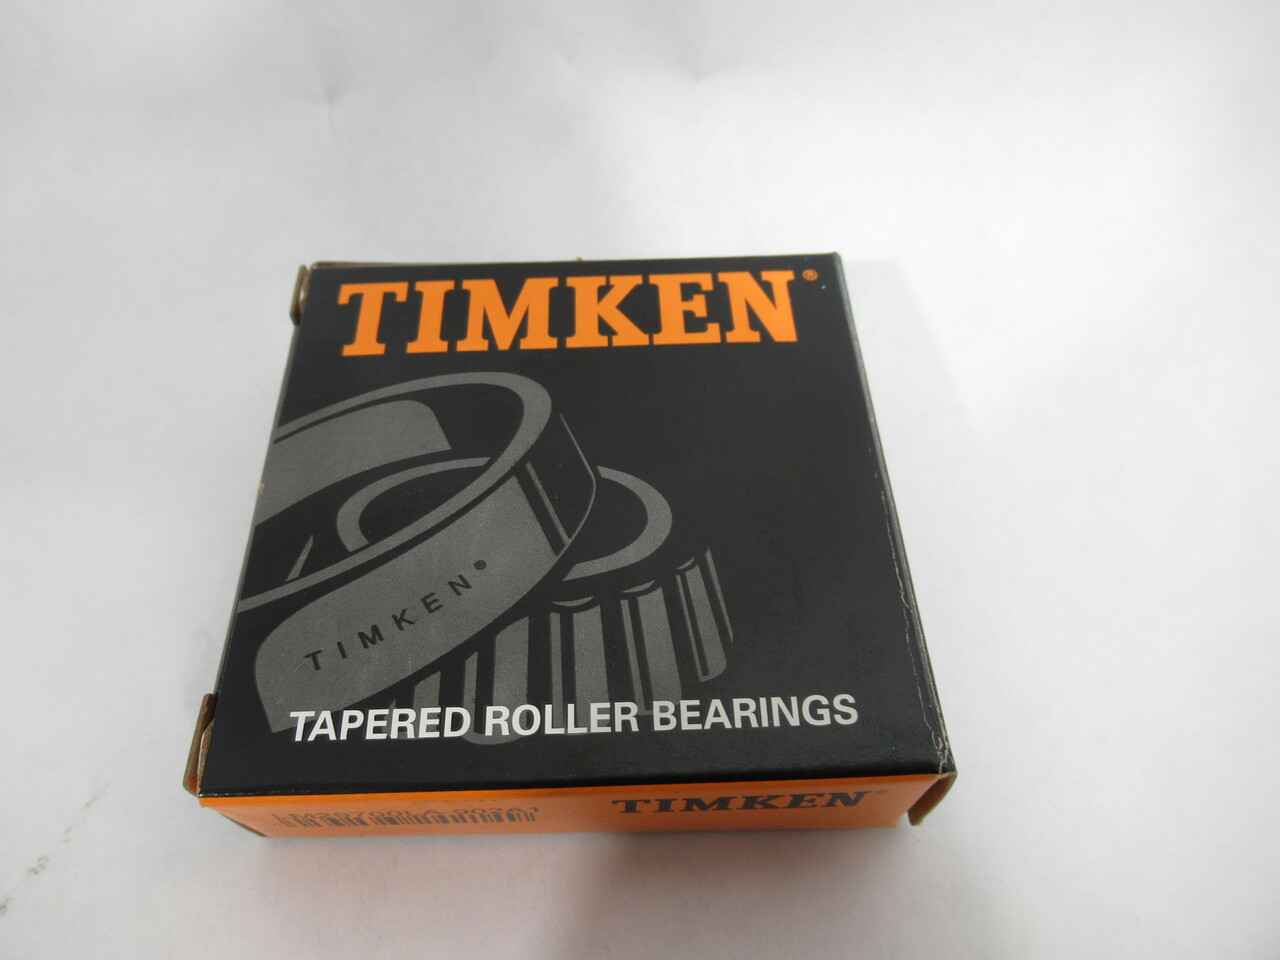 Timken LM29700LA-902A1 Tapered Roller Bearing Assy. W/Seal 1.5"ID 0.72"W NEW